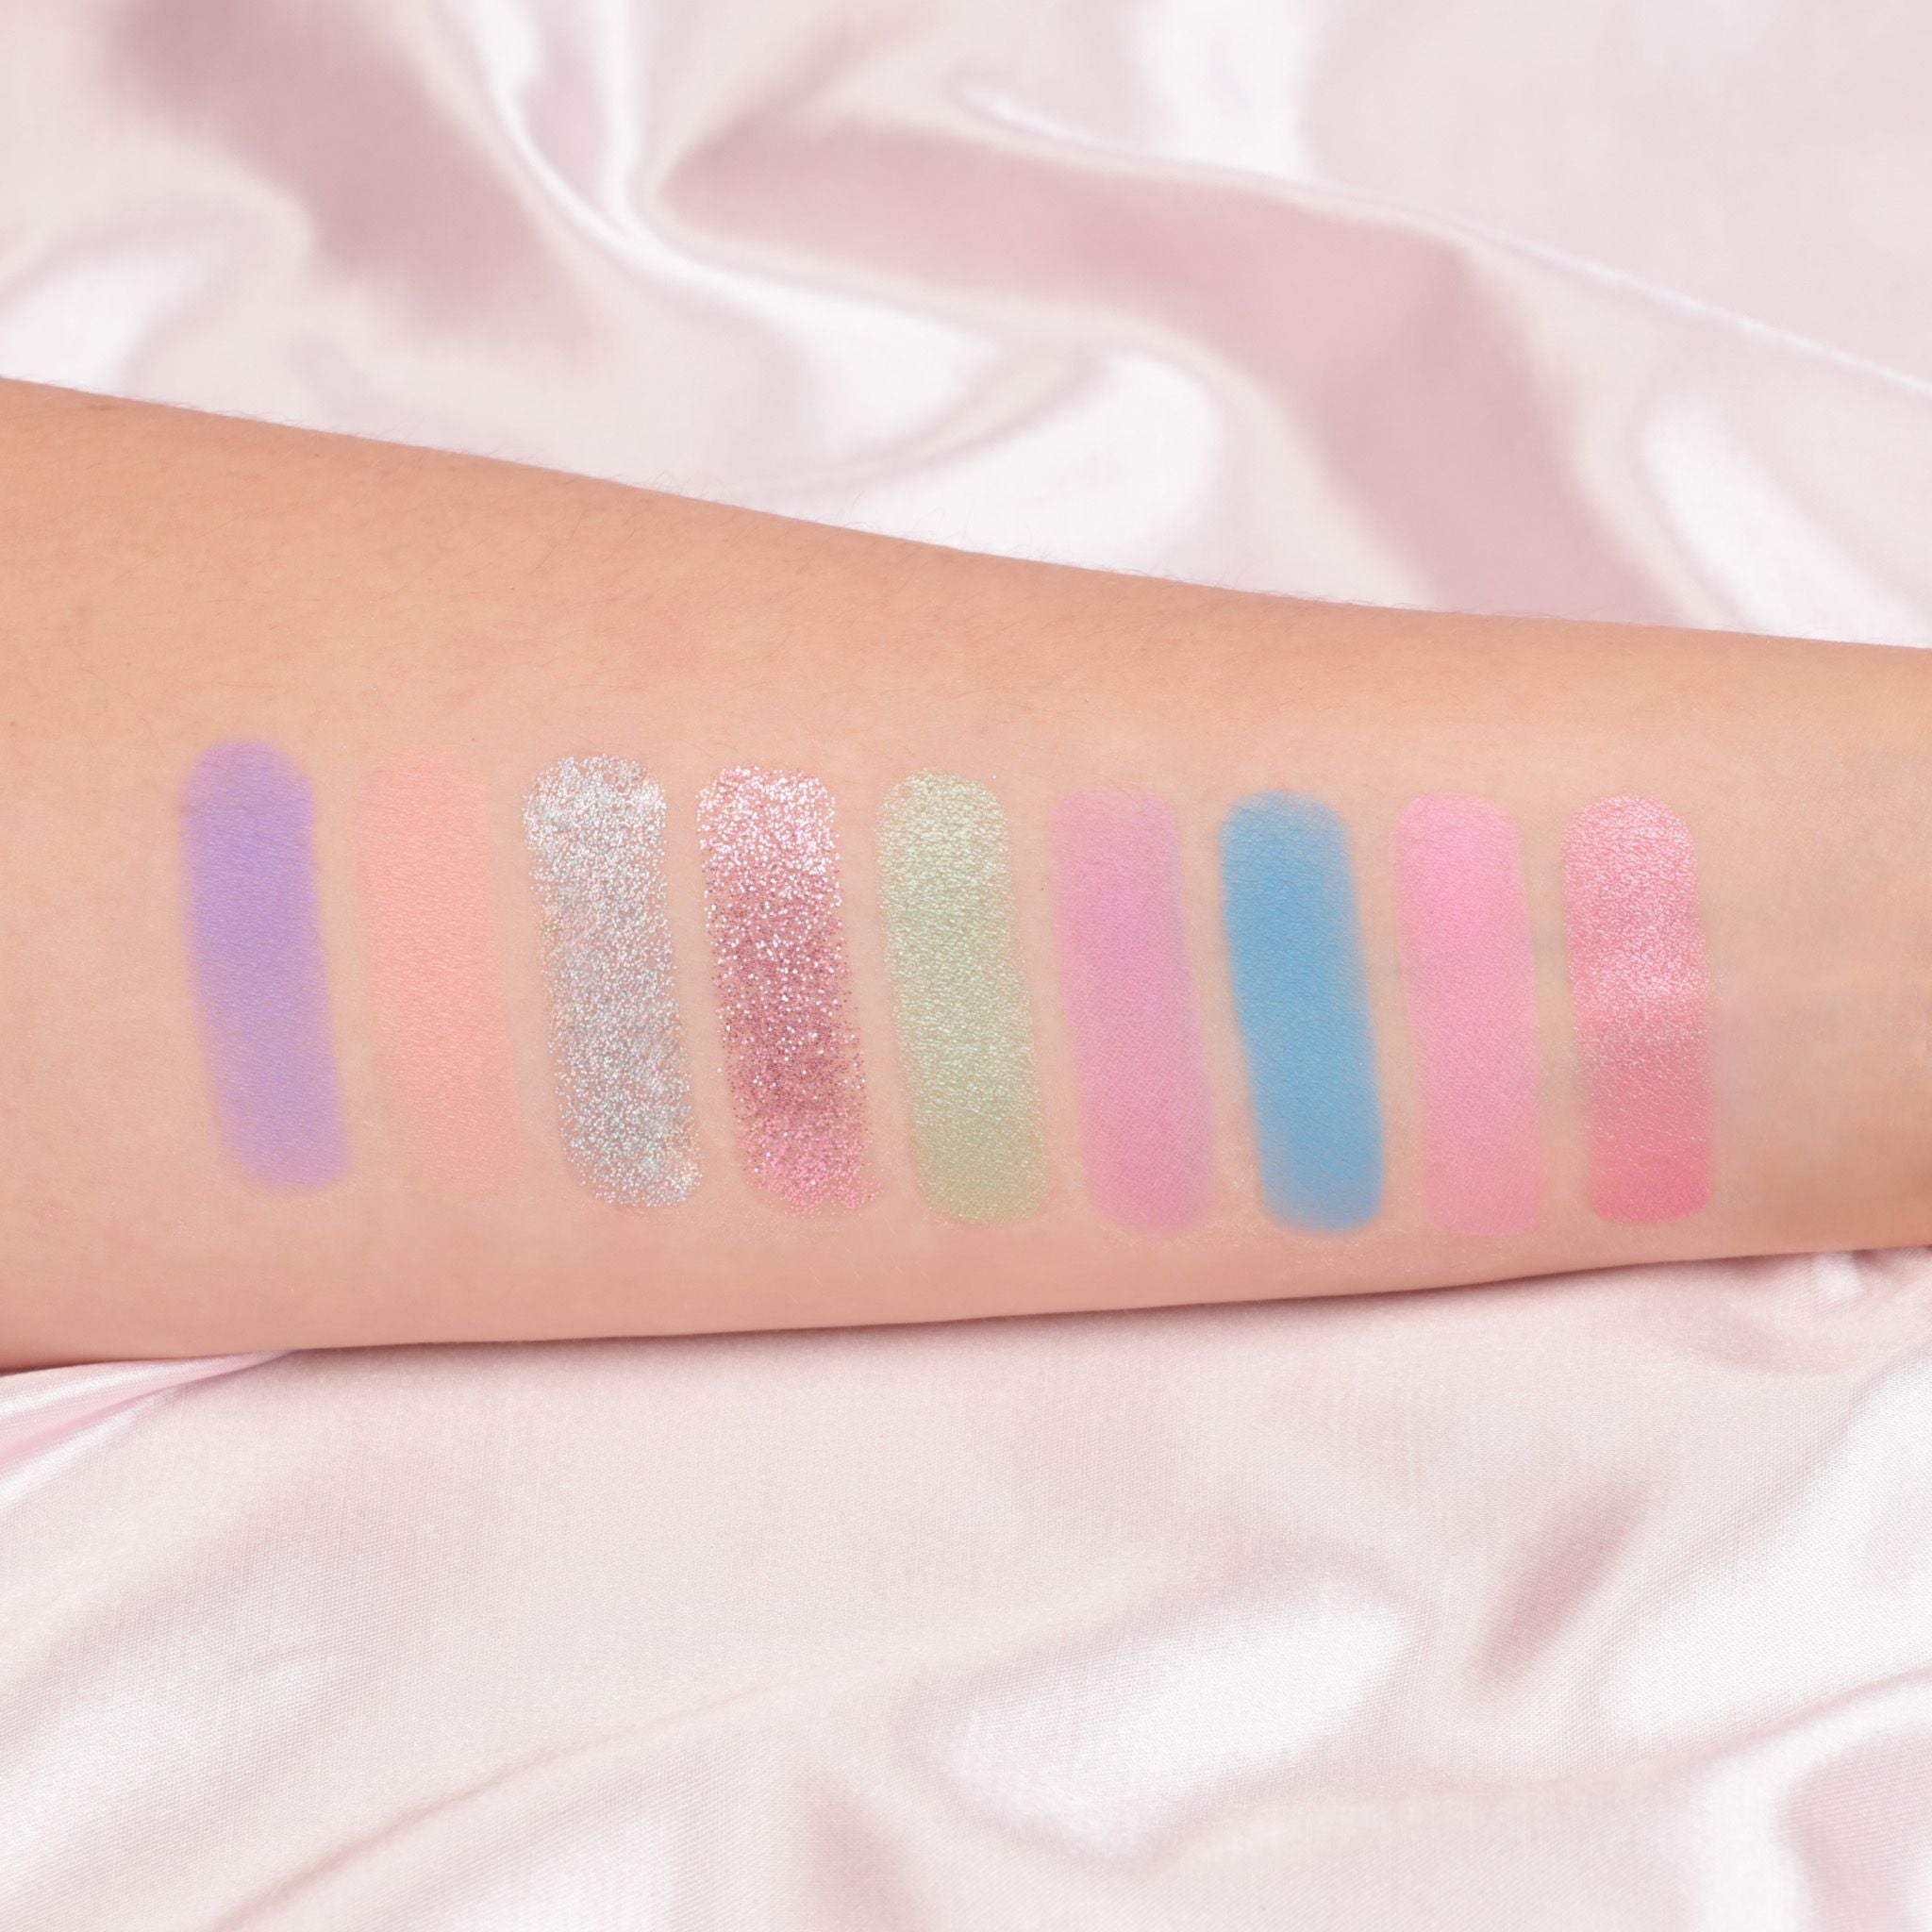 Marie Cationette Palette